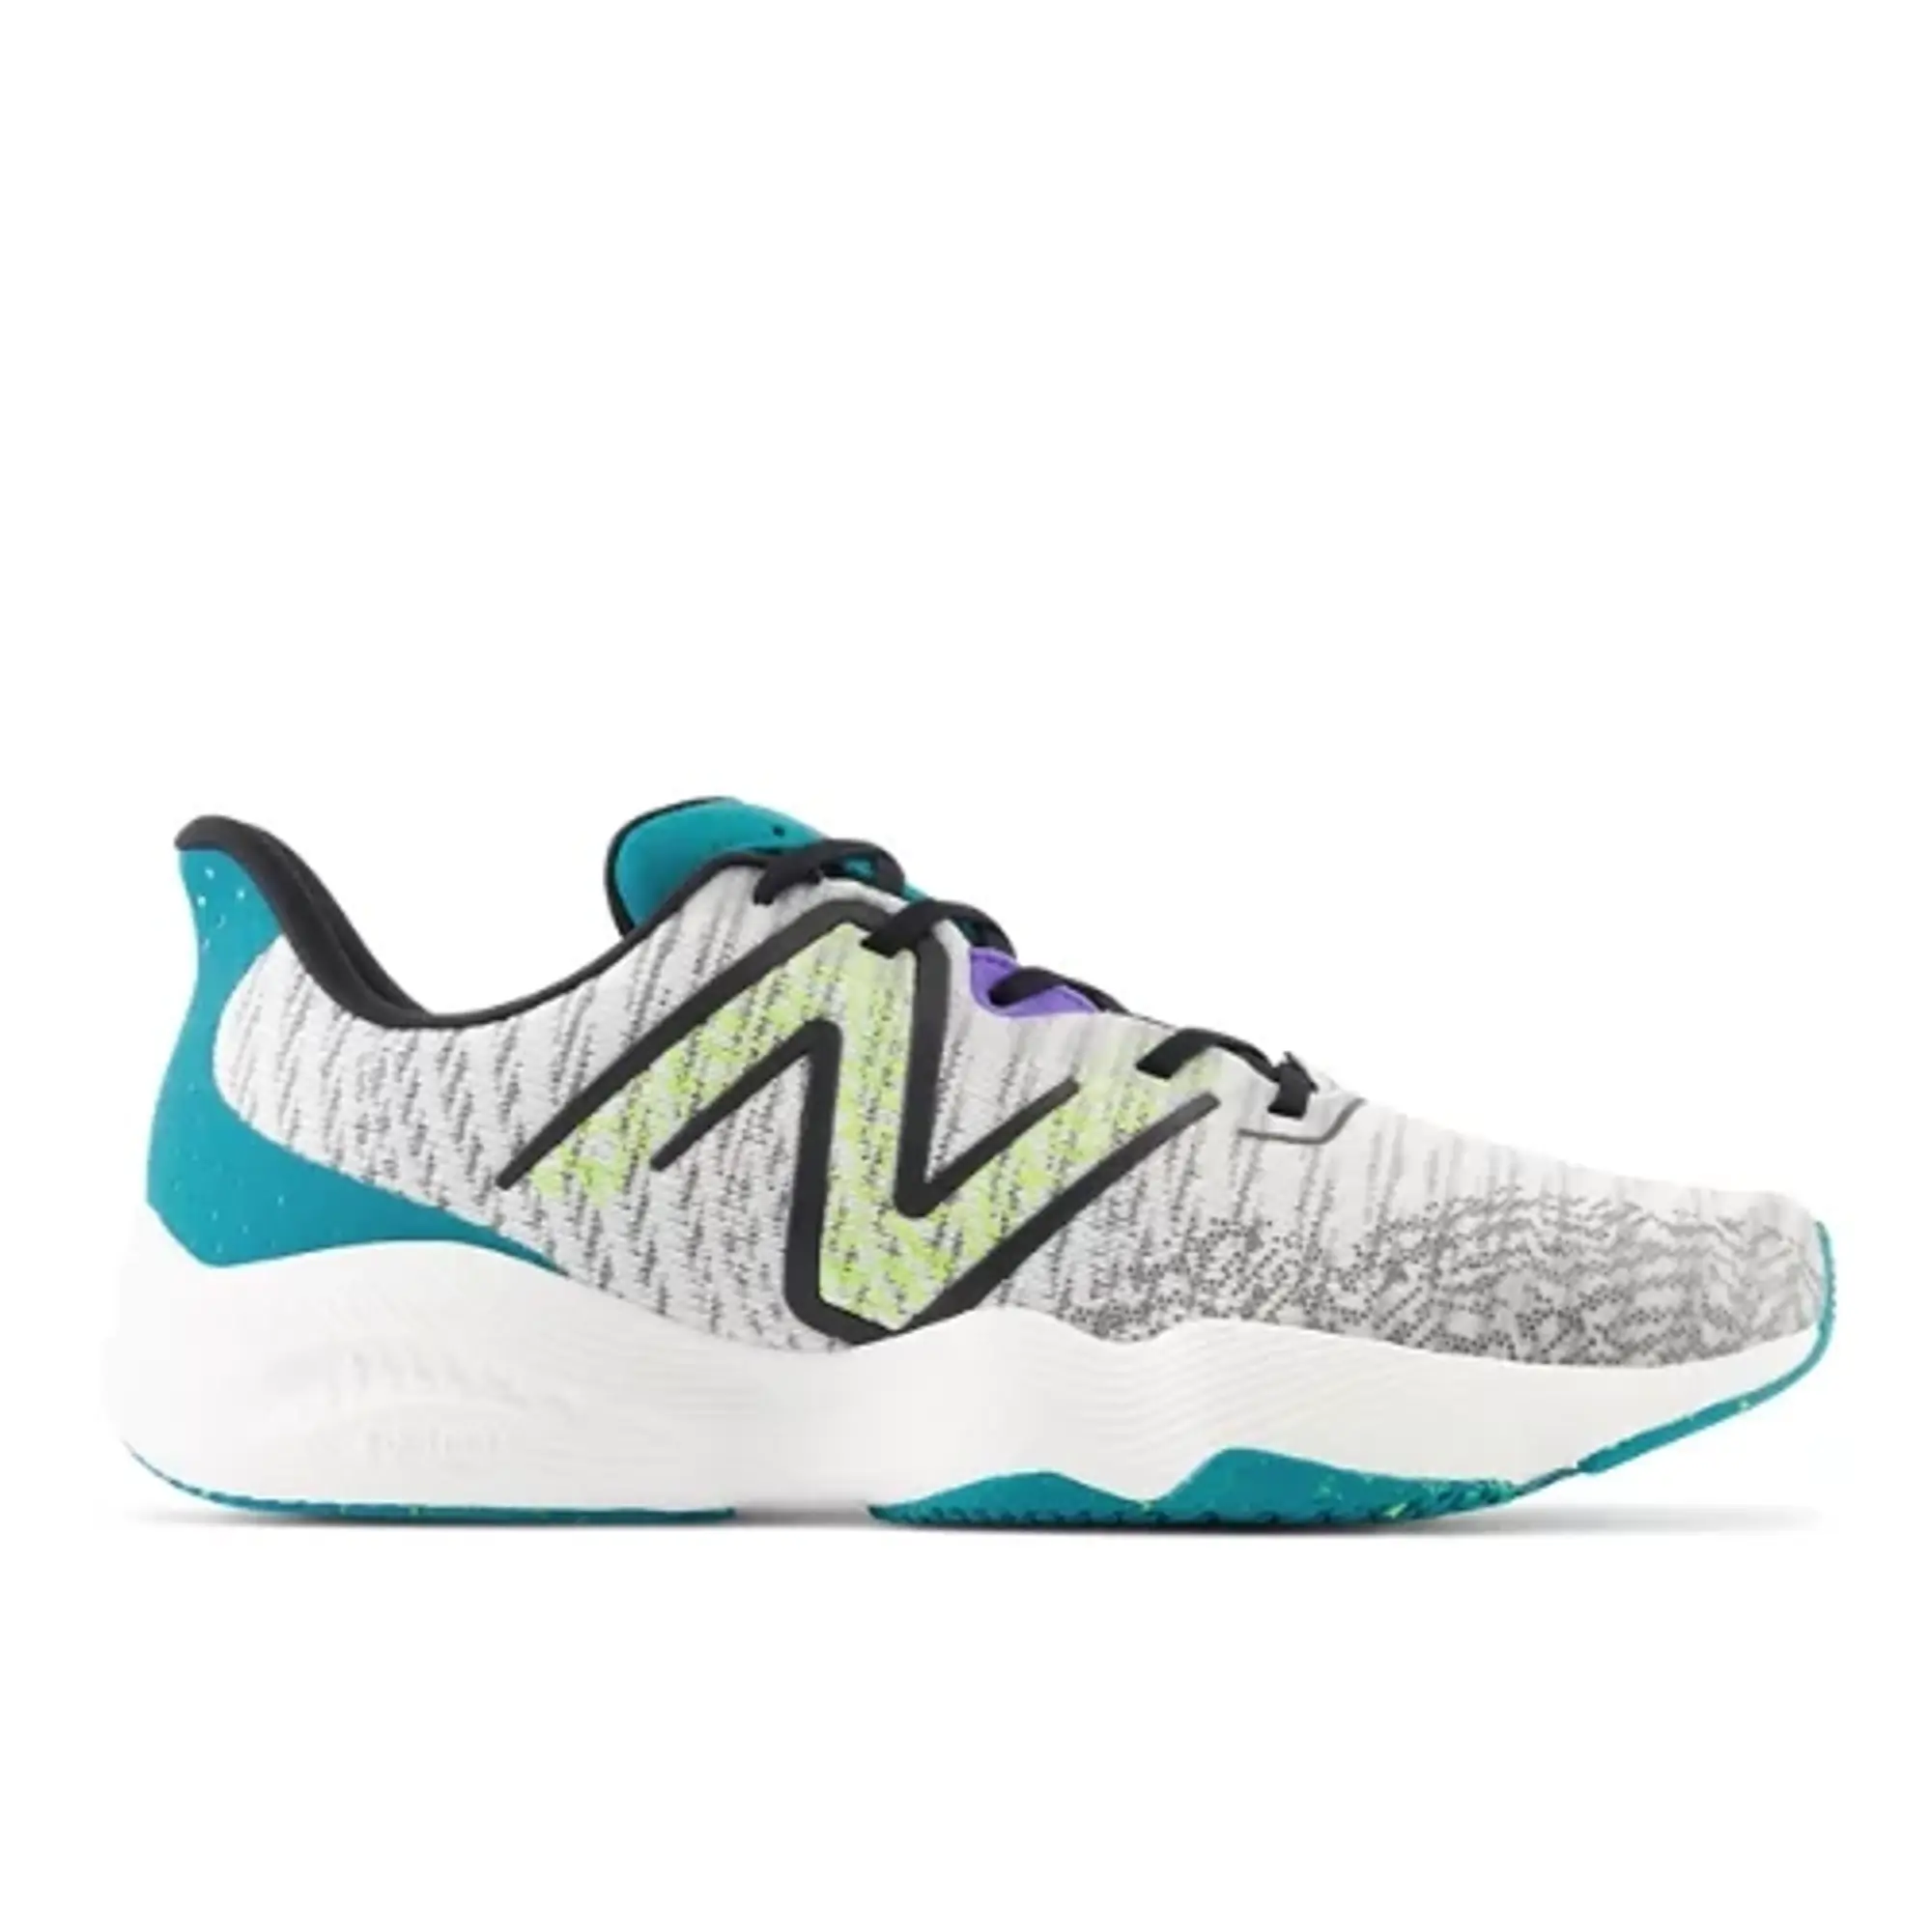 New Balance Men's FuelCell Shift TR v2 in White/Black/Green Textile